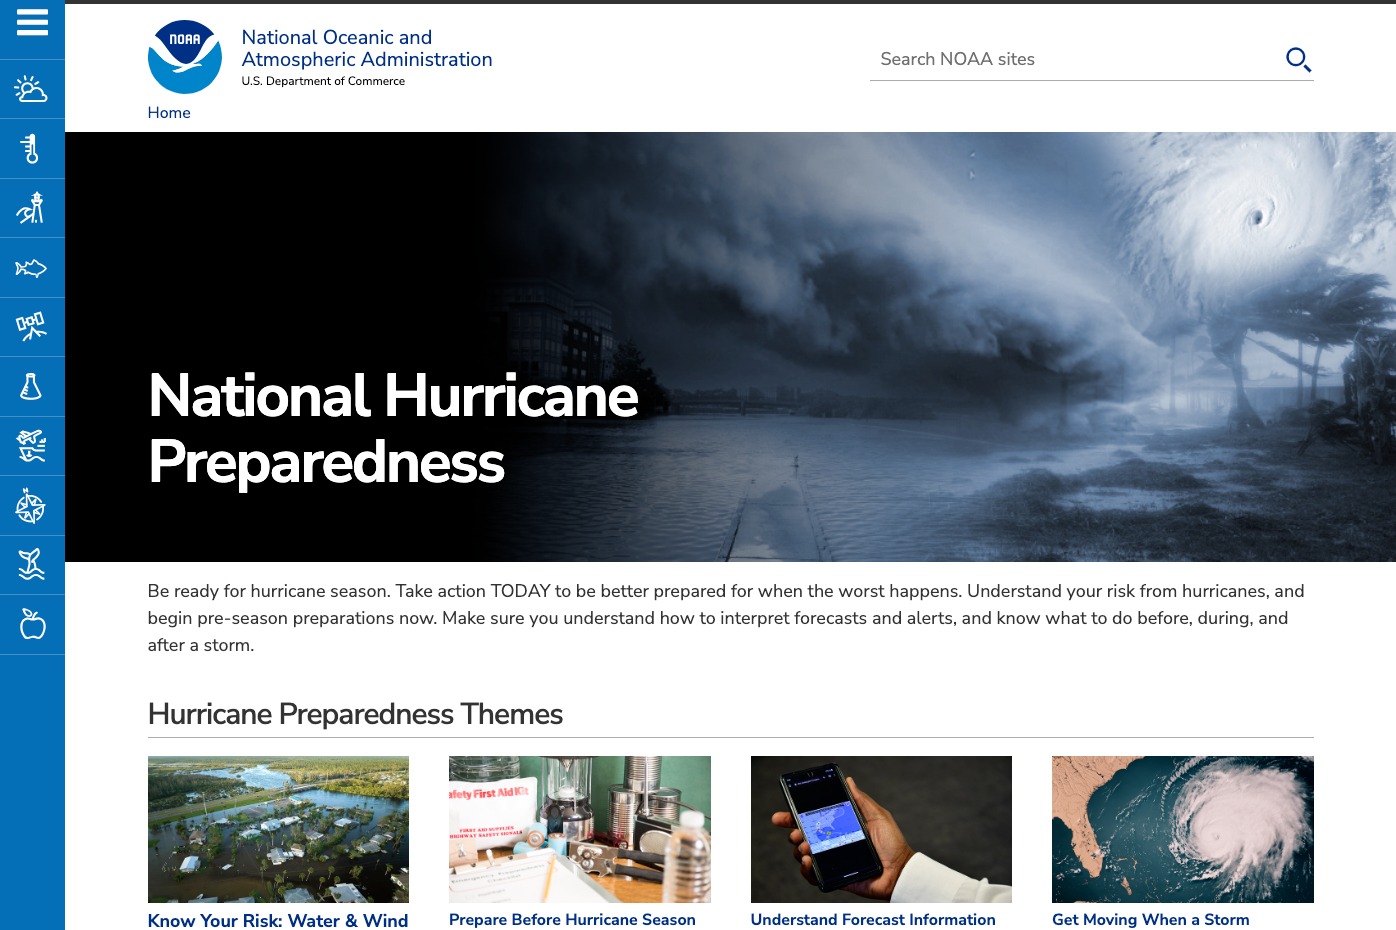 Also check information from the National Weather Service